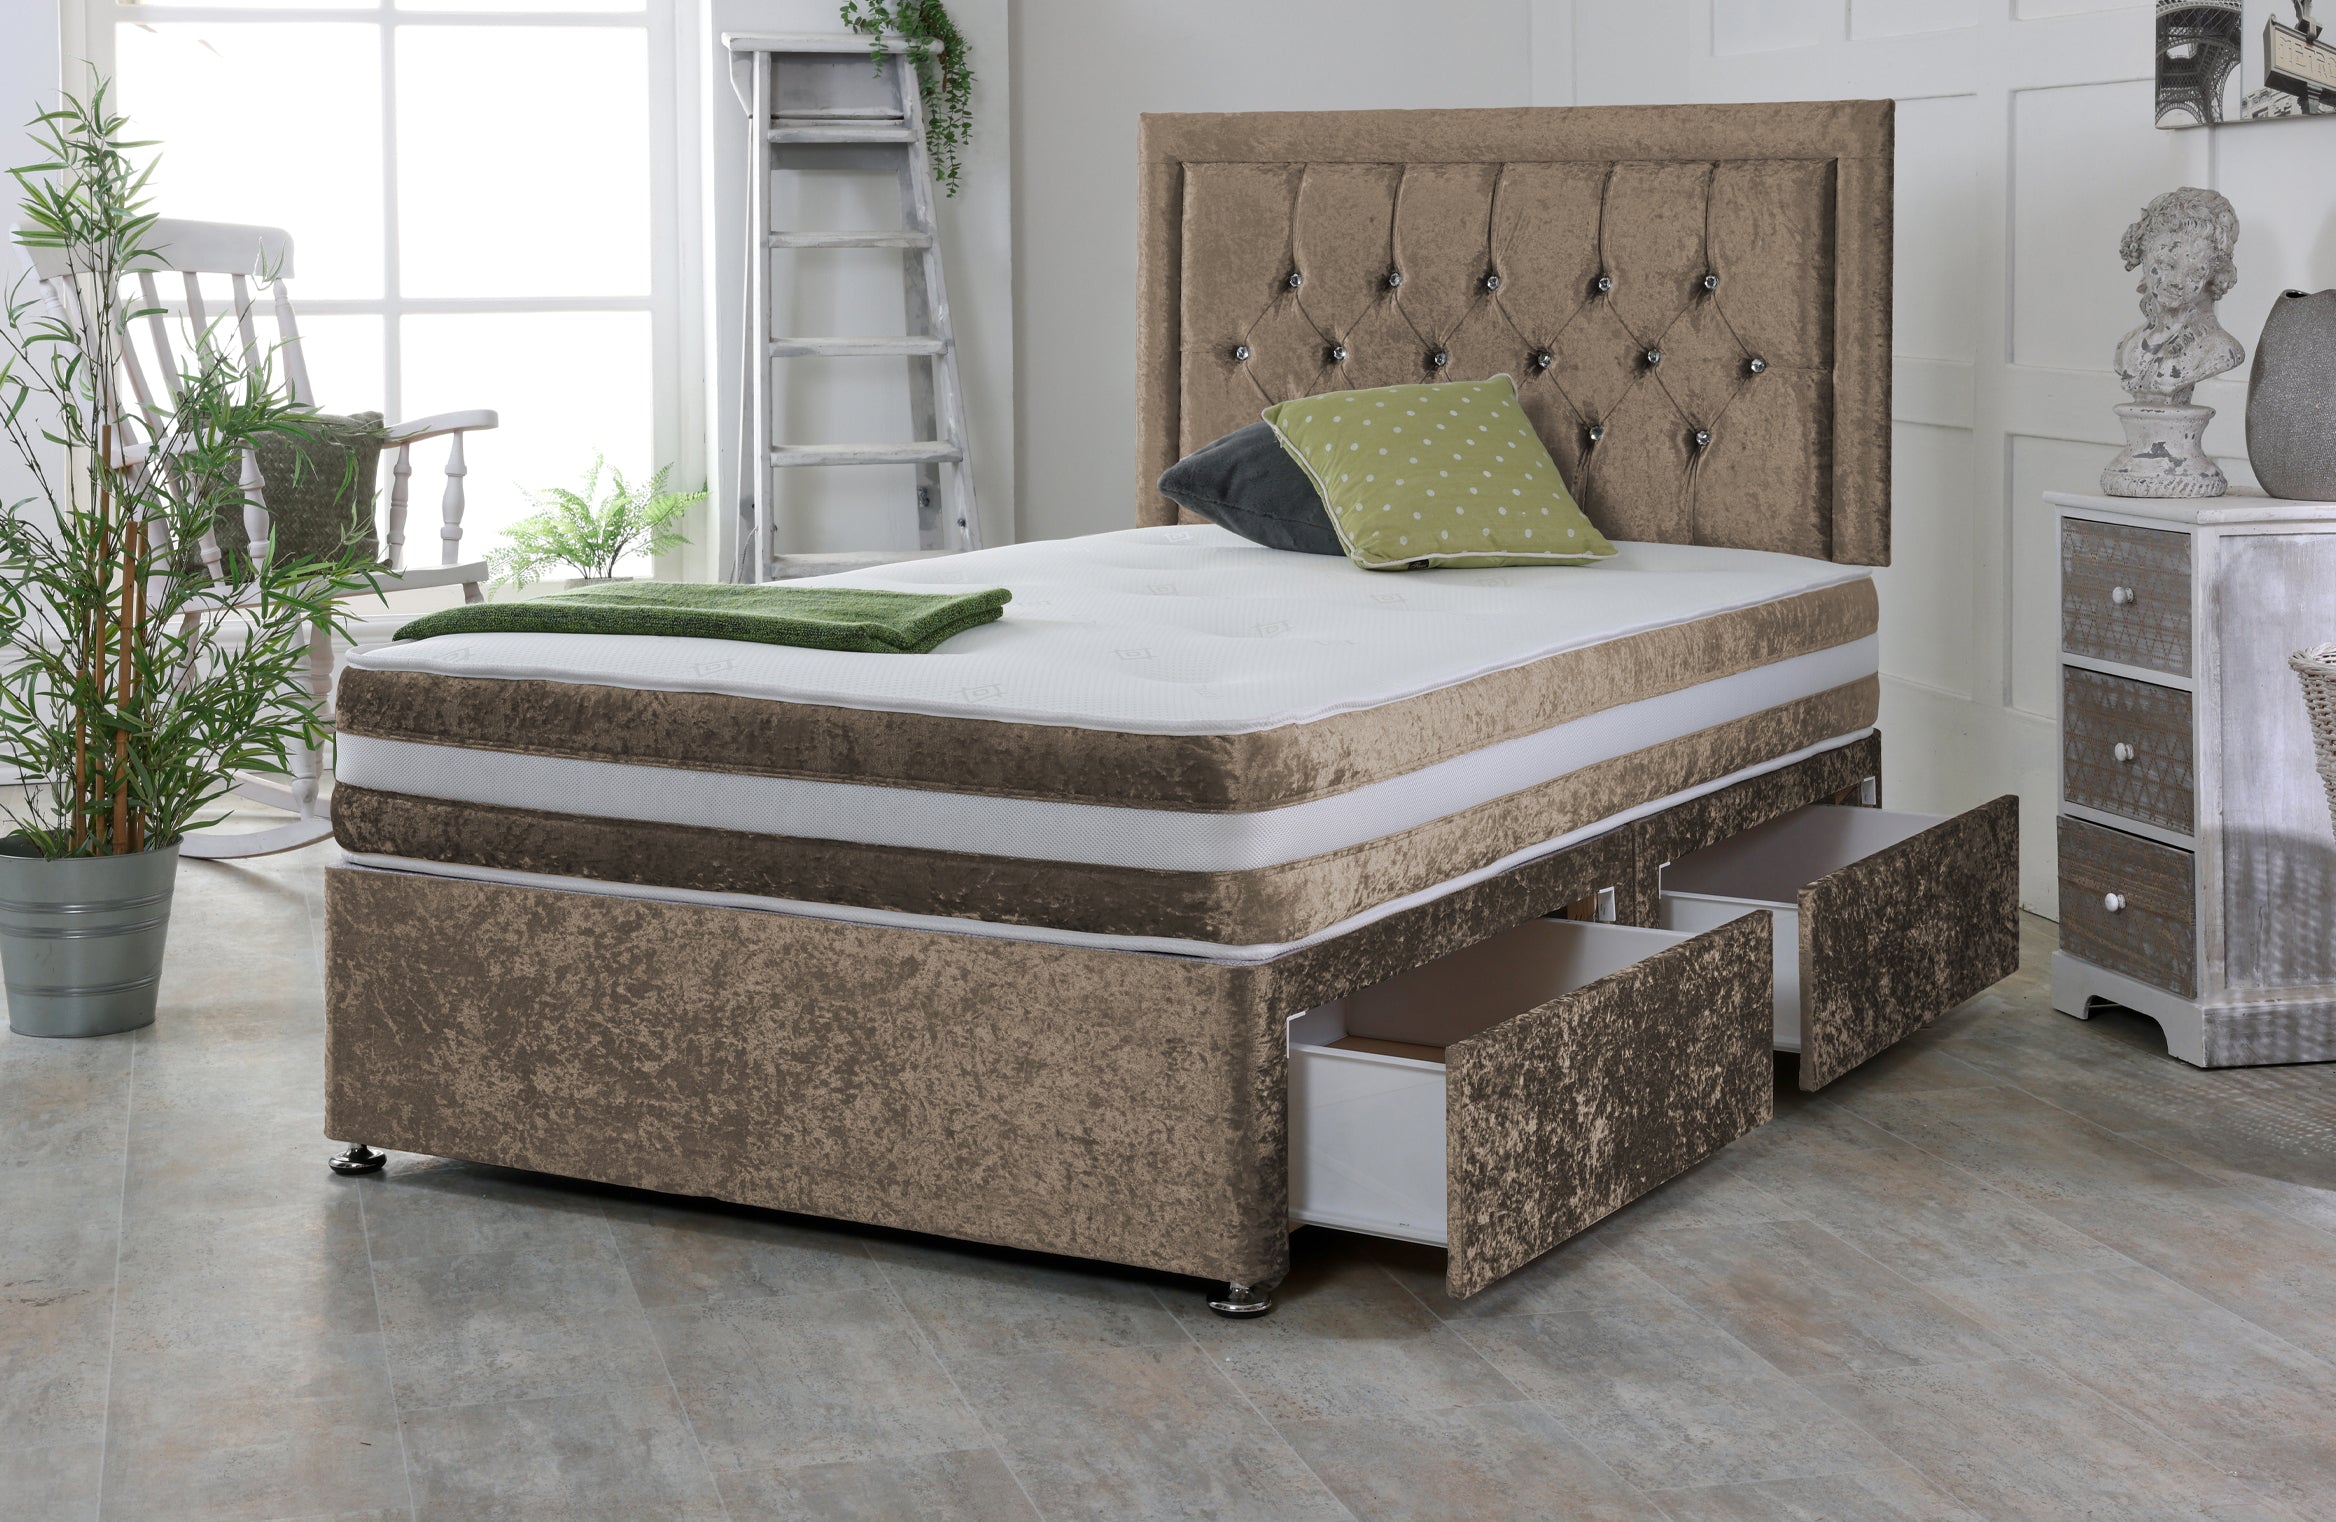 Miami Crushed Velvet Divan Bed Base Set with Mattress and Headboard